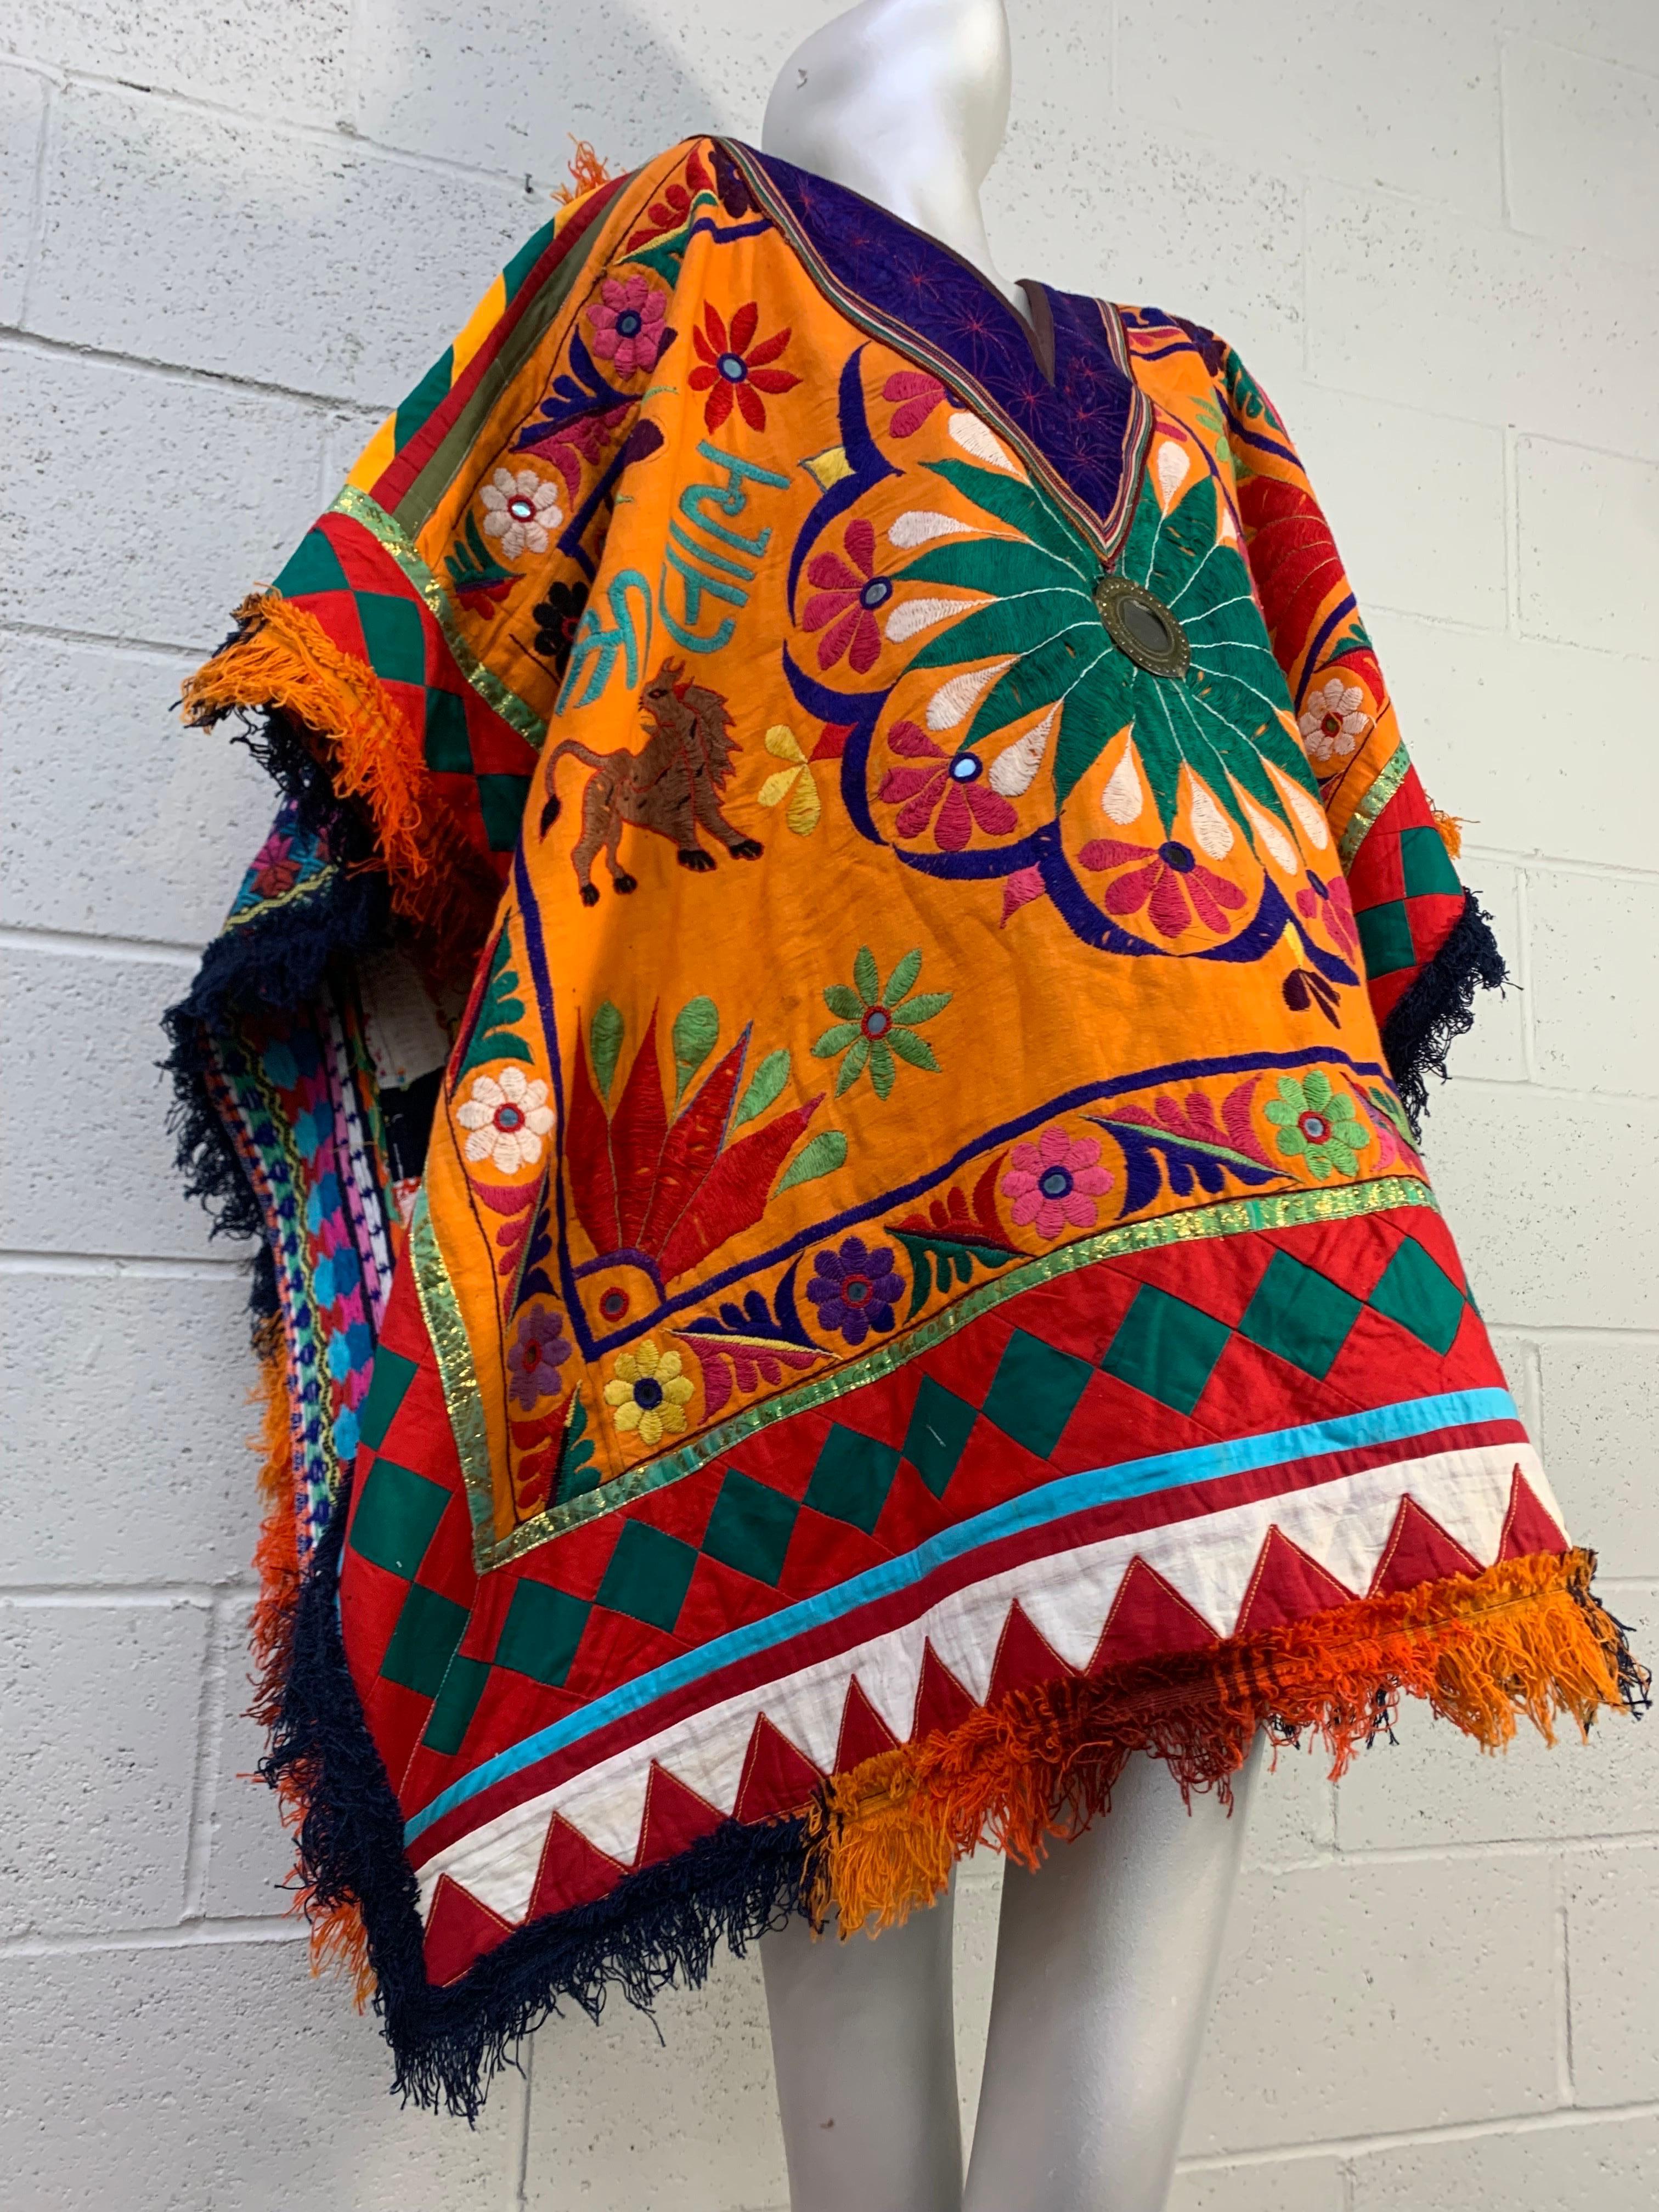 Torso Creations Art-To-Wear Woven & Embroidered Sarape  Poncho in Vivid Colors For Sale 13